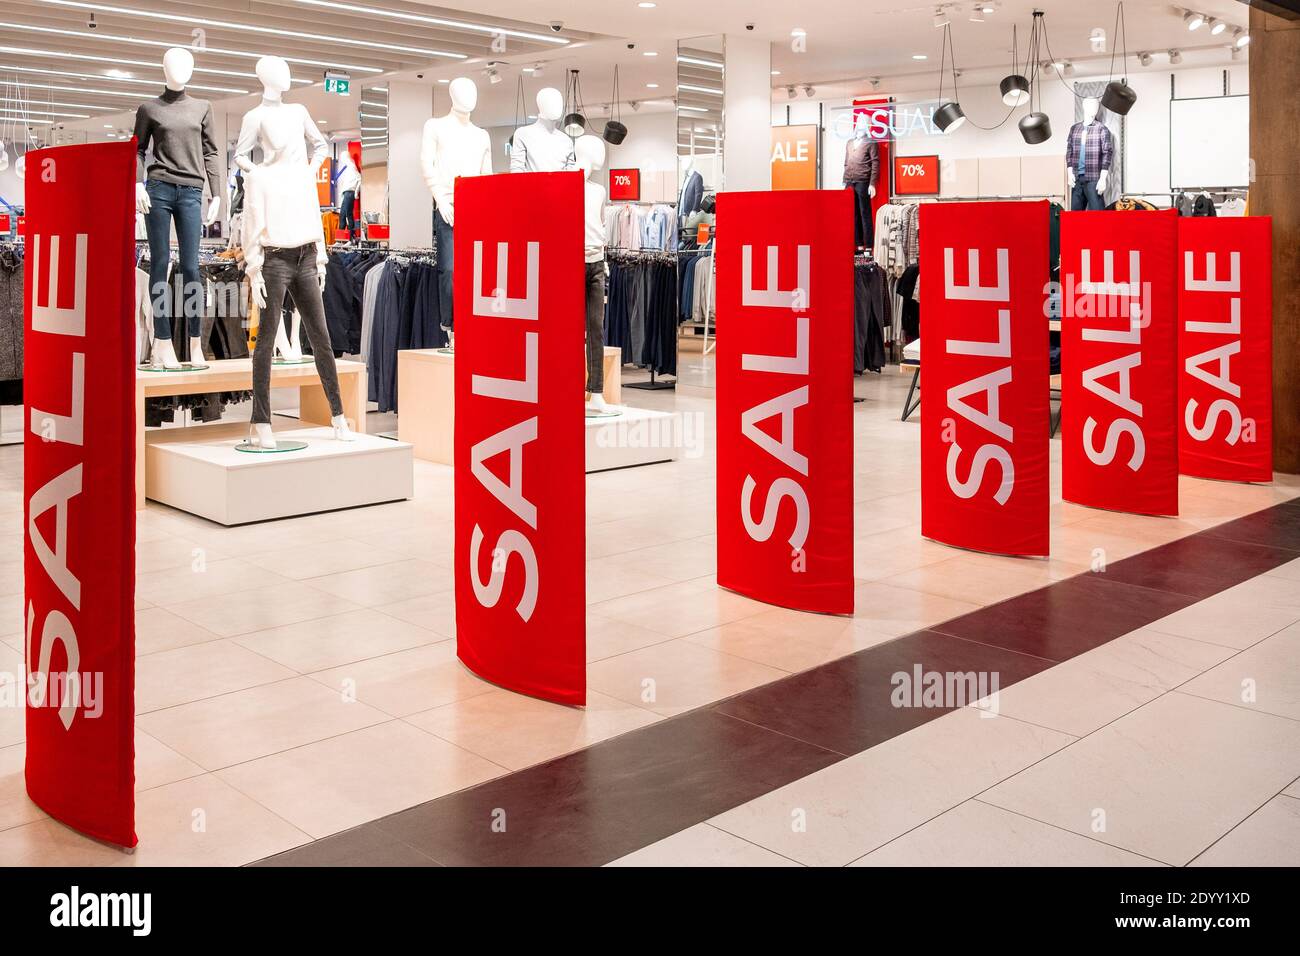 Red billboards stand at the entrance to a clothing boutique with sale information. In the background are manikins and hangers. Promotion, advertising, Stock Photo